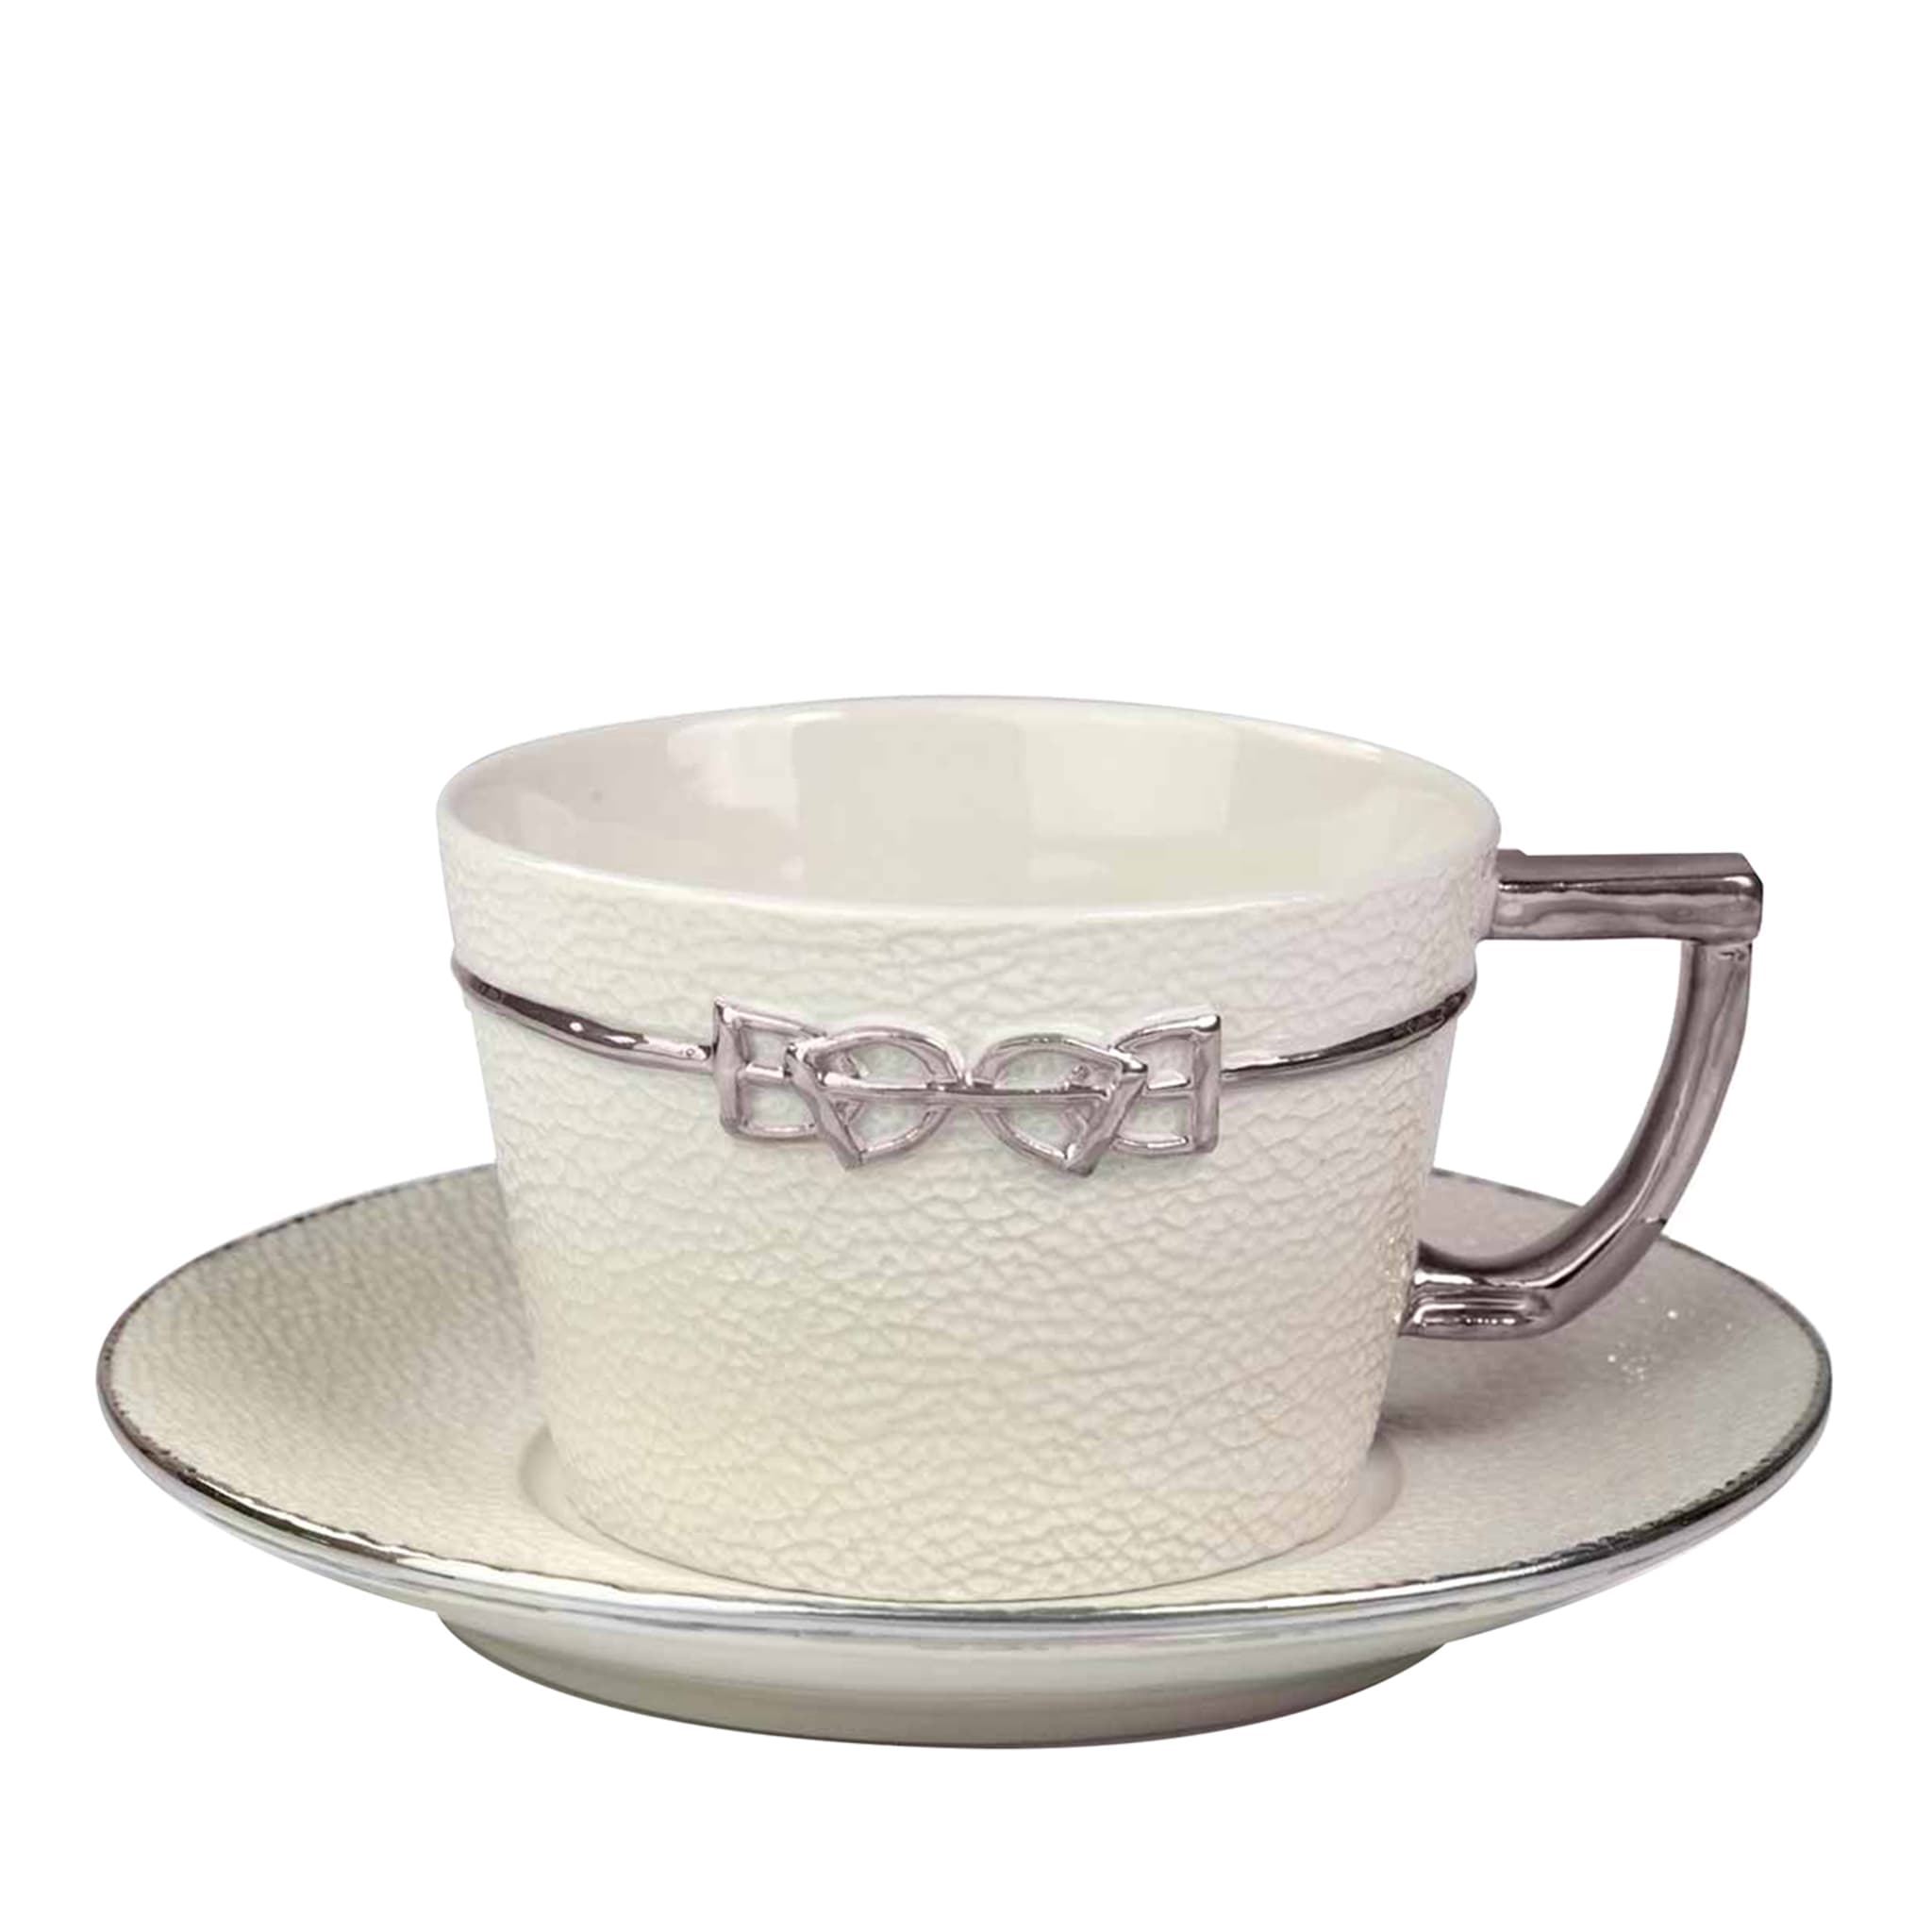 DRESSAGE TEA CUP AND SAUCER - WHITE AND SILVER - Main view